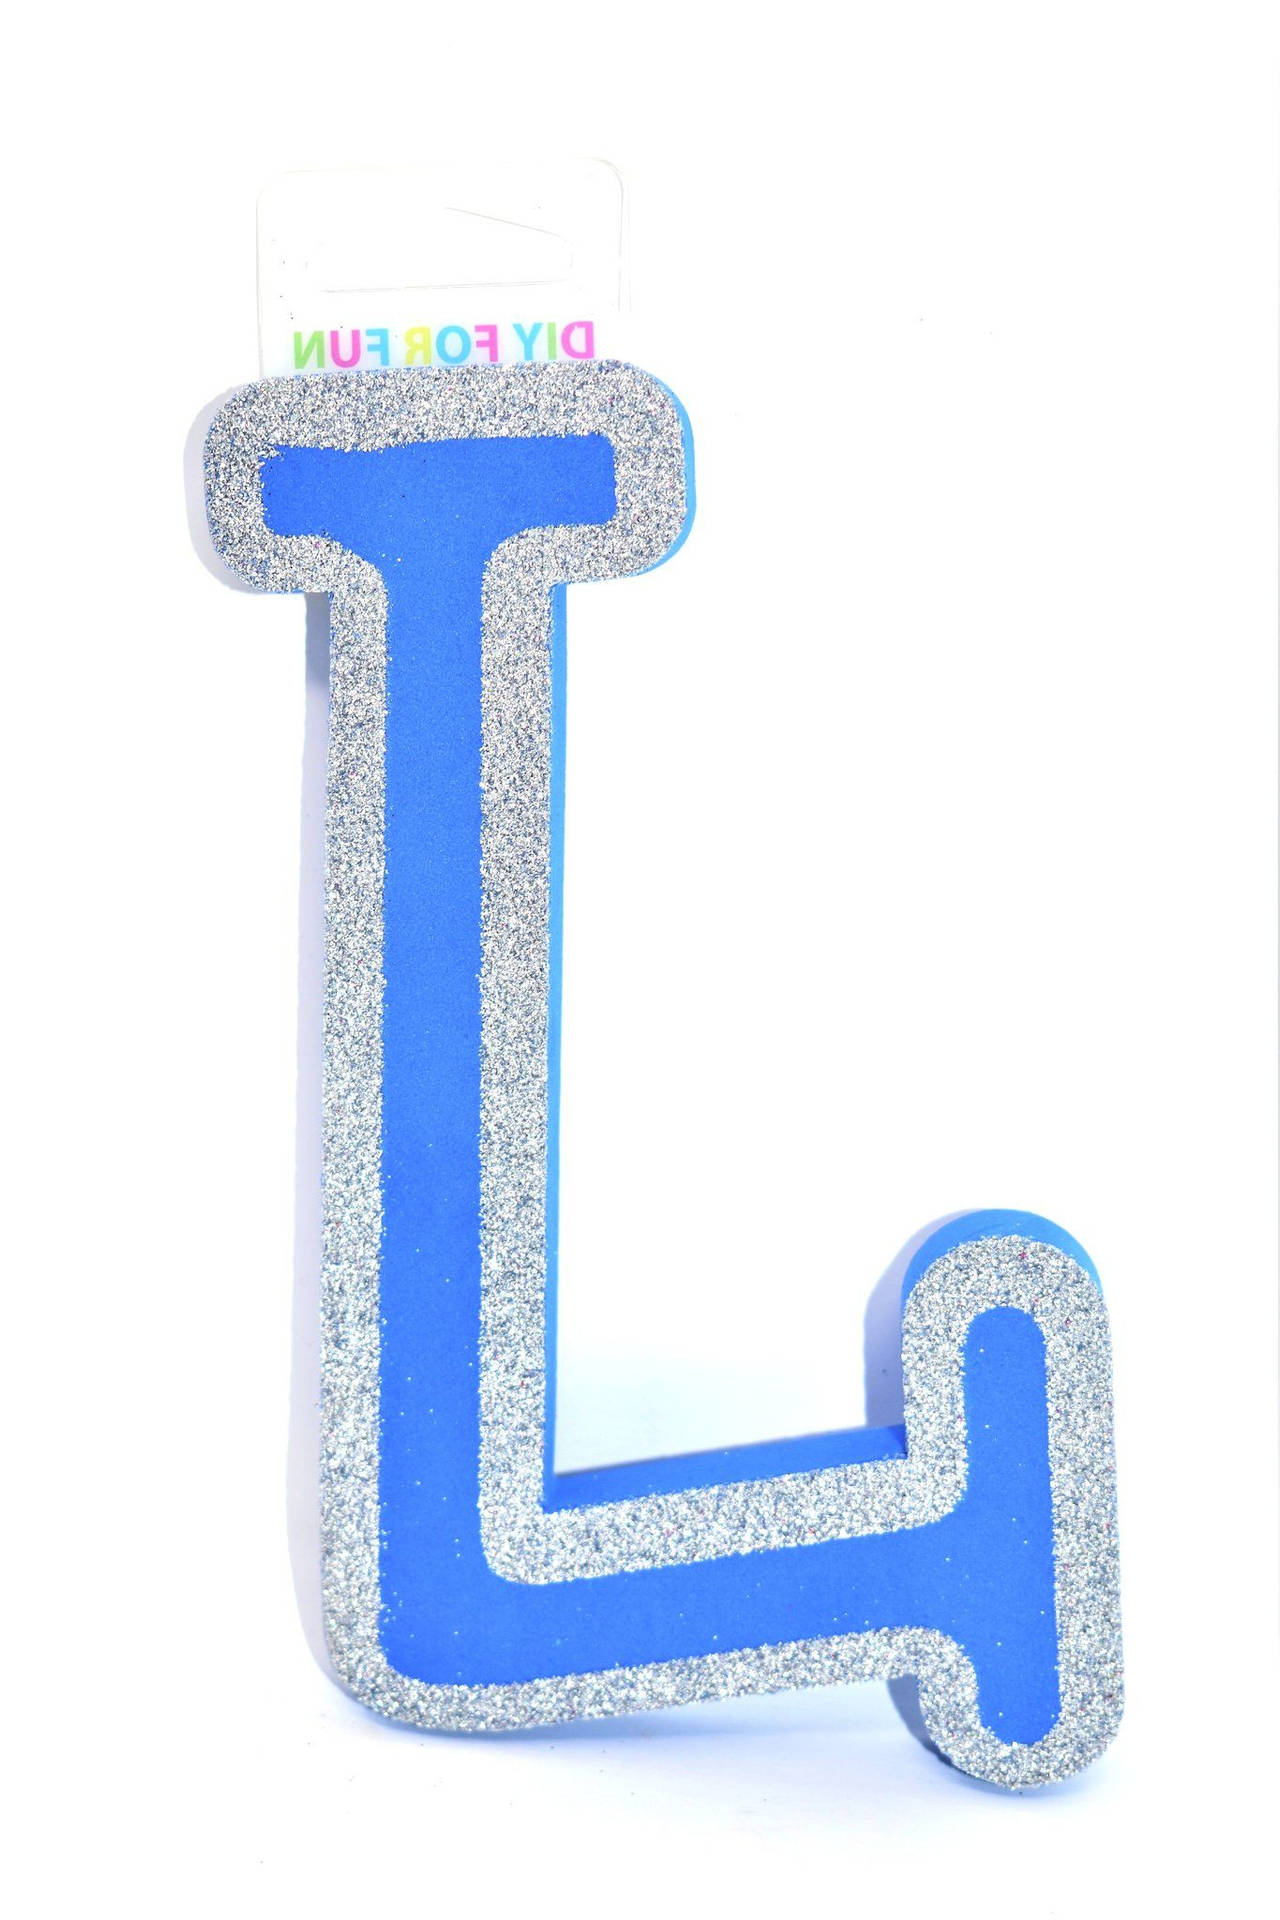 Blue Letter L With Glitters Background